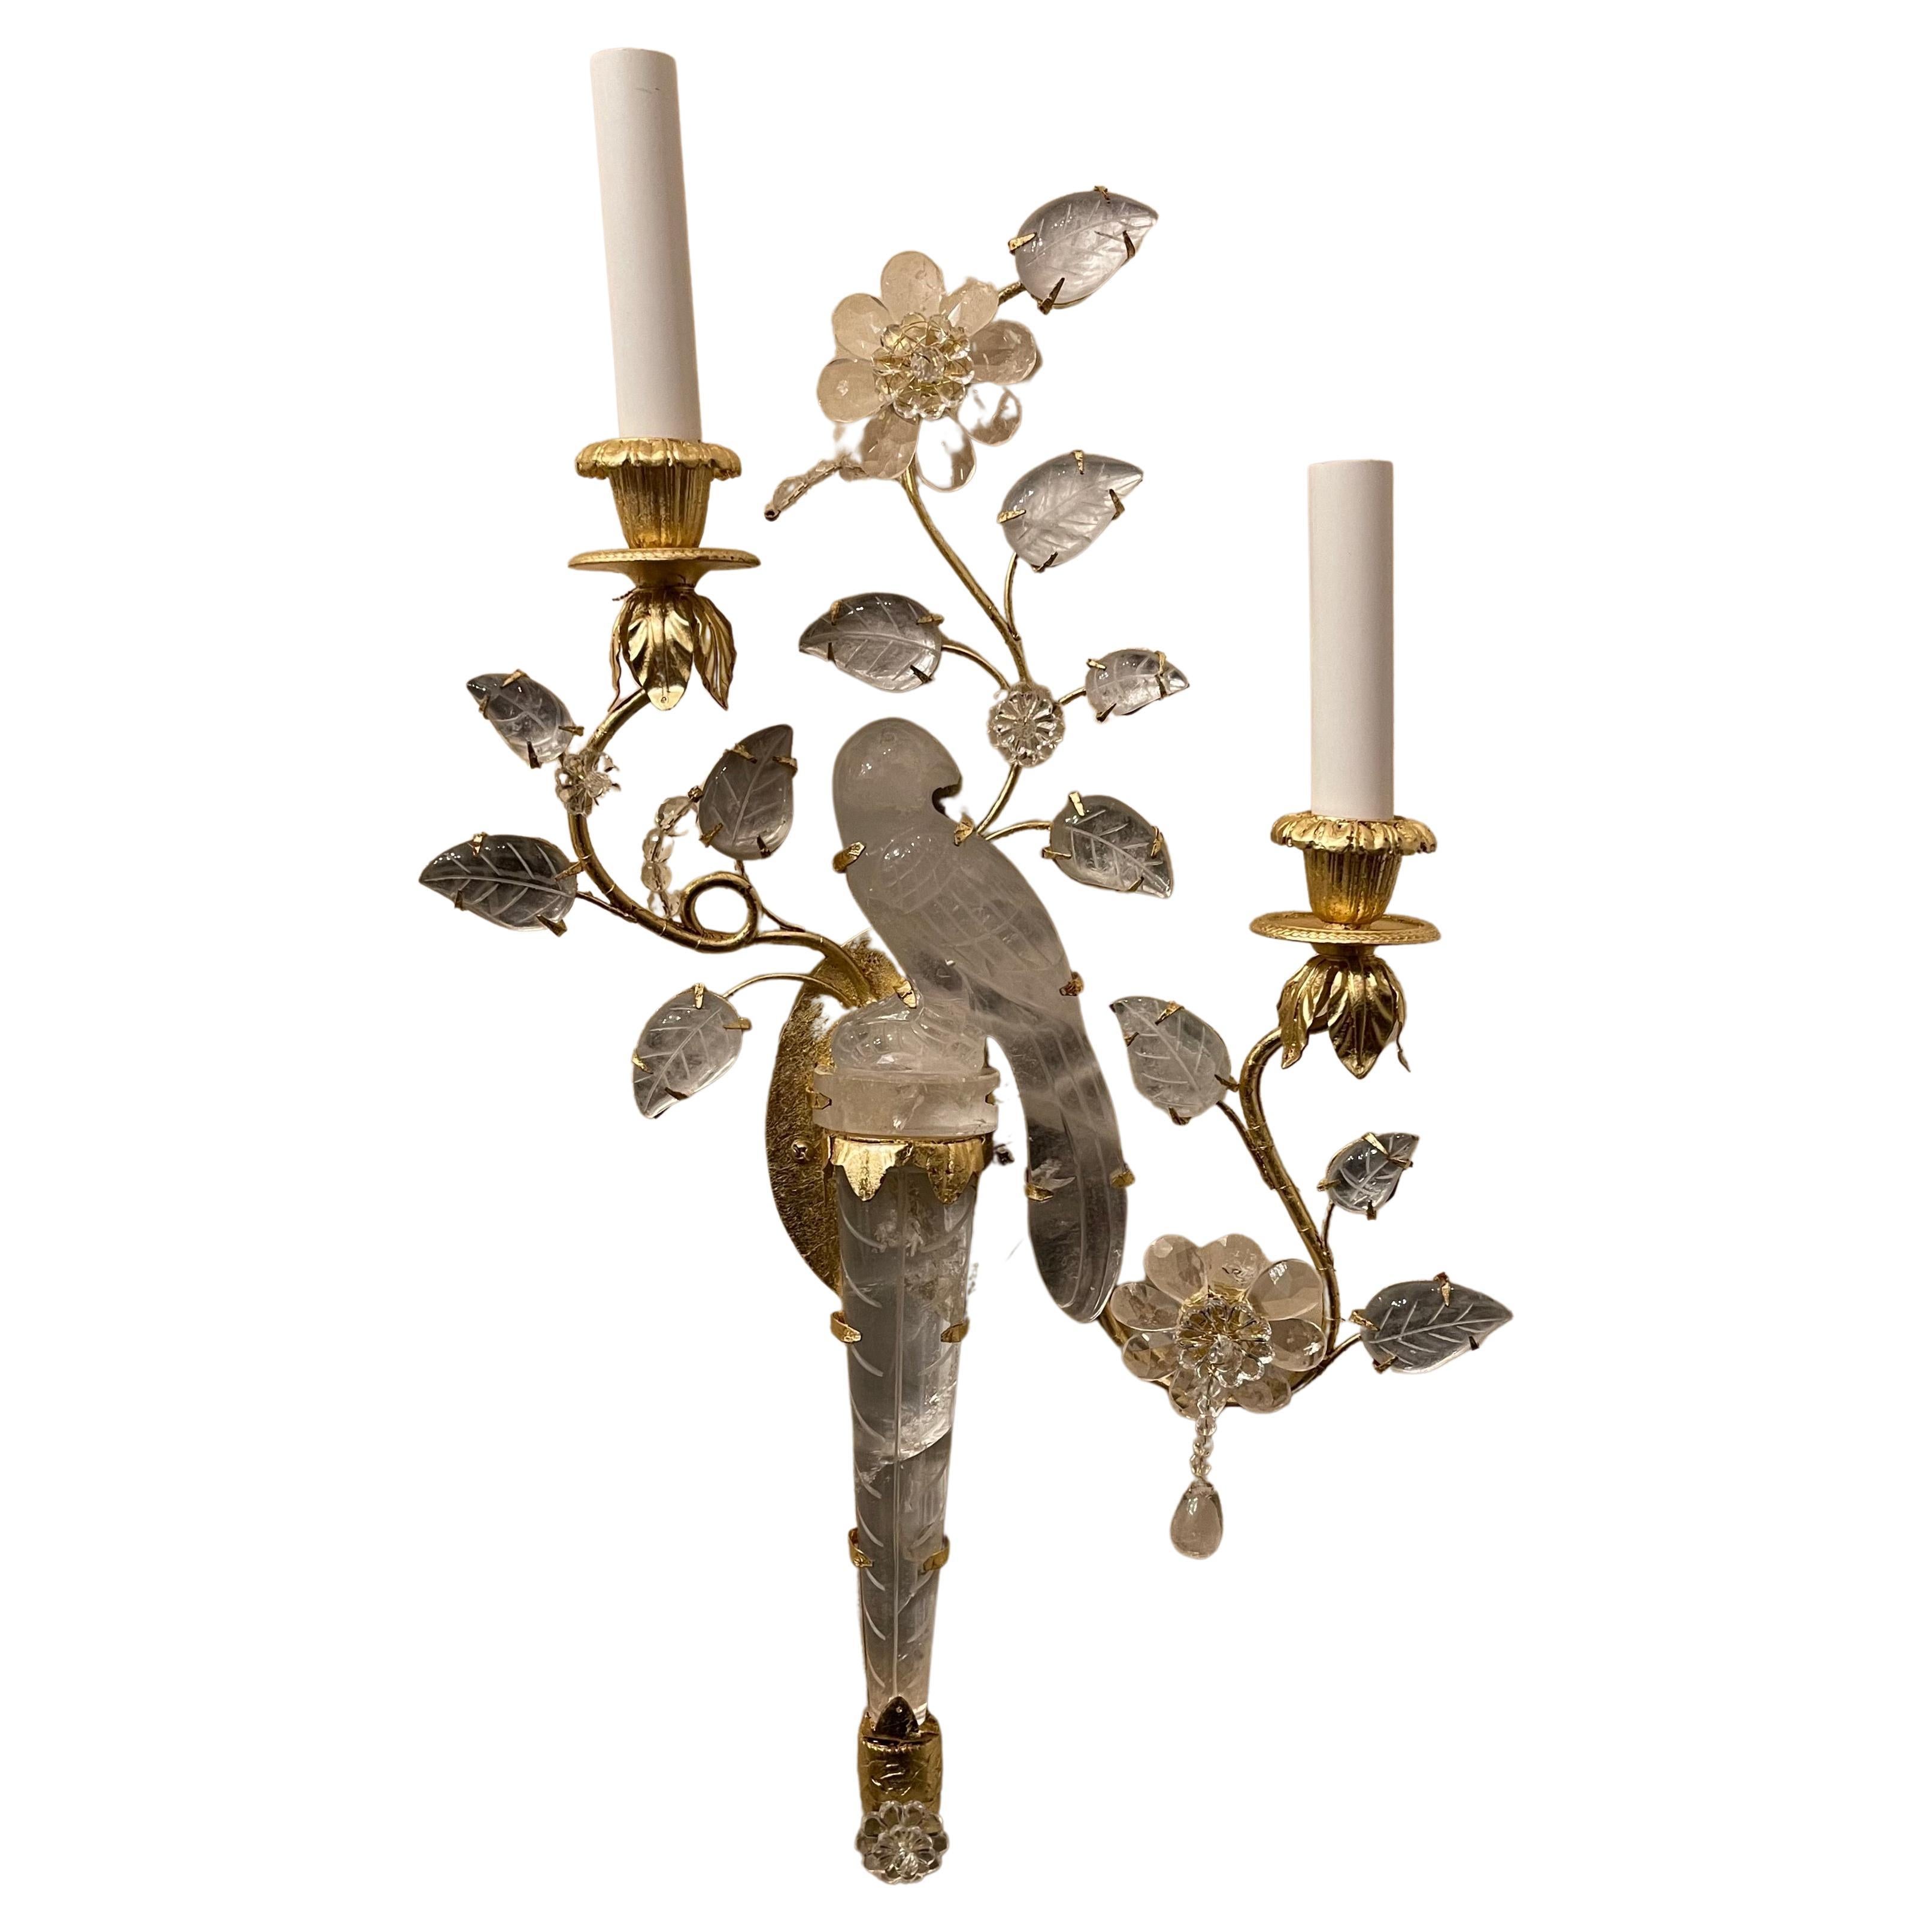 A wonderful pair of Baguès style two-arm gold gilt rock crystal bird urn, flower and leaf form petite sconces.
Each rewire with new candelabra sockets.

2 Pairs are available 
Each pair sold separately.